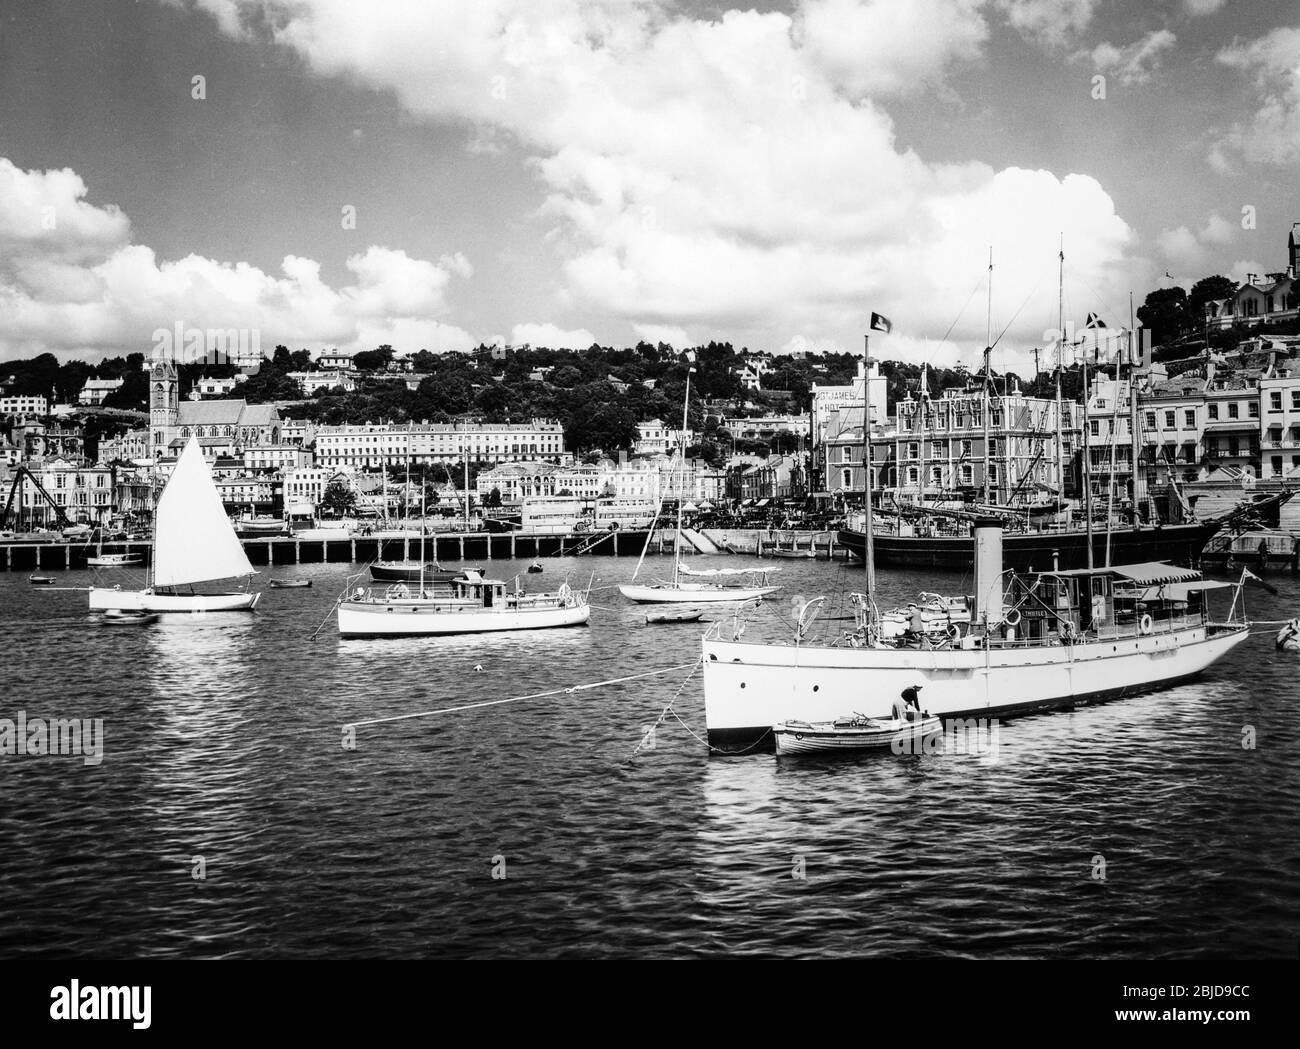 Early mid twentieth century vintage black and white photograph showing Torquay Harbour on the South Coast of England. Photo shows various boats and ships in harbour. Also visible are the White House Hotel, Norfolk Hotel, St. James Hotel, and Regina Hotel. Stock Photo